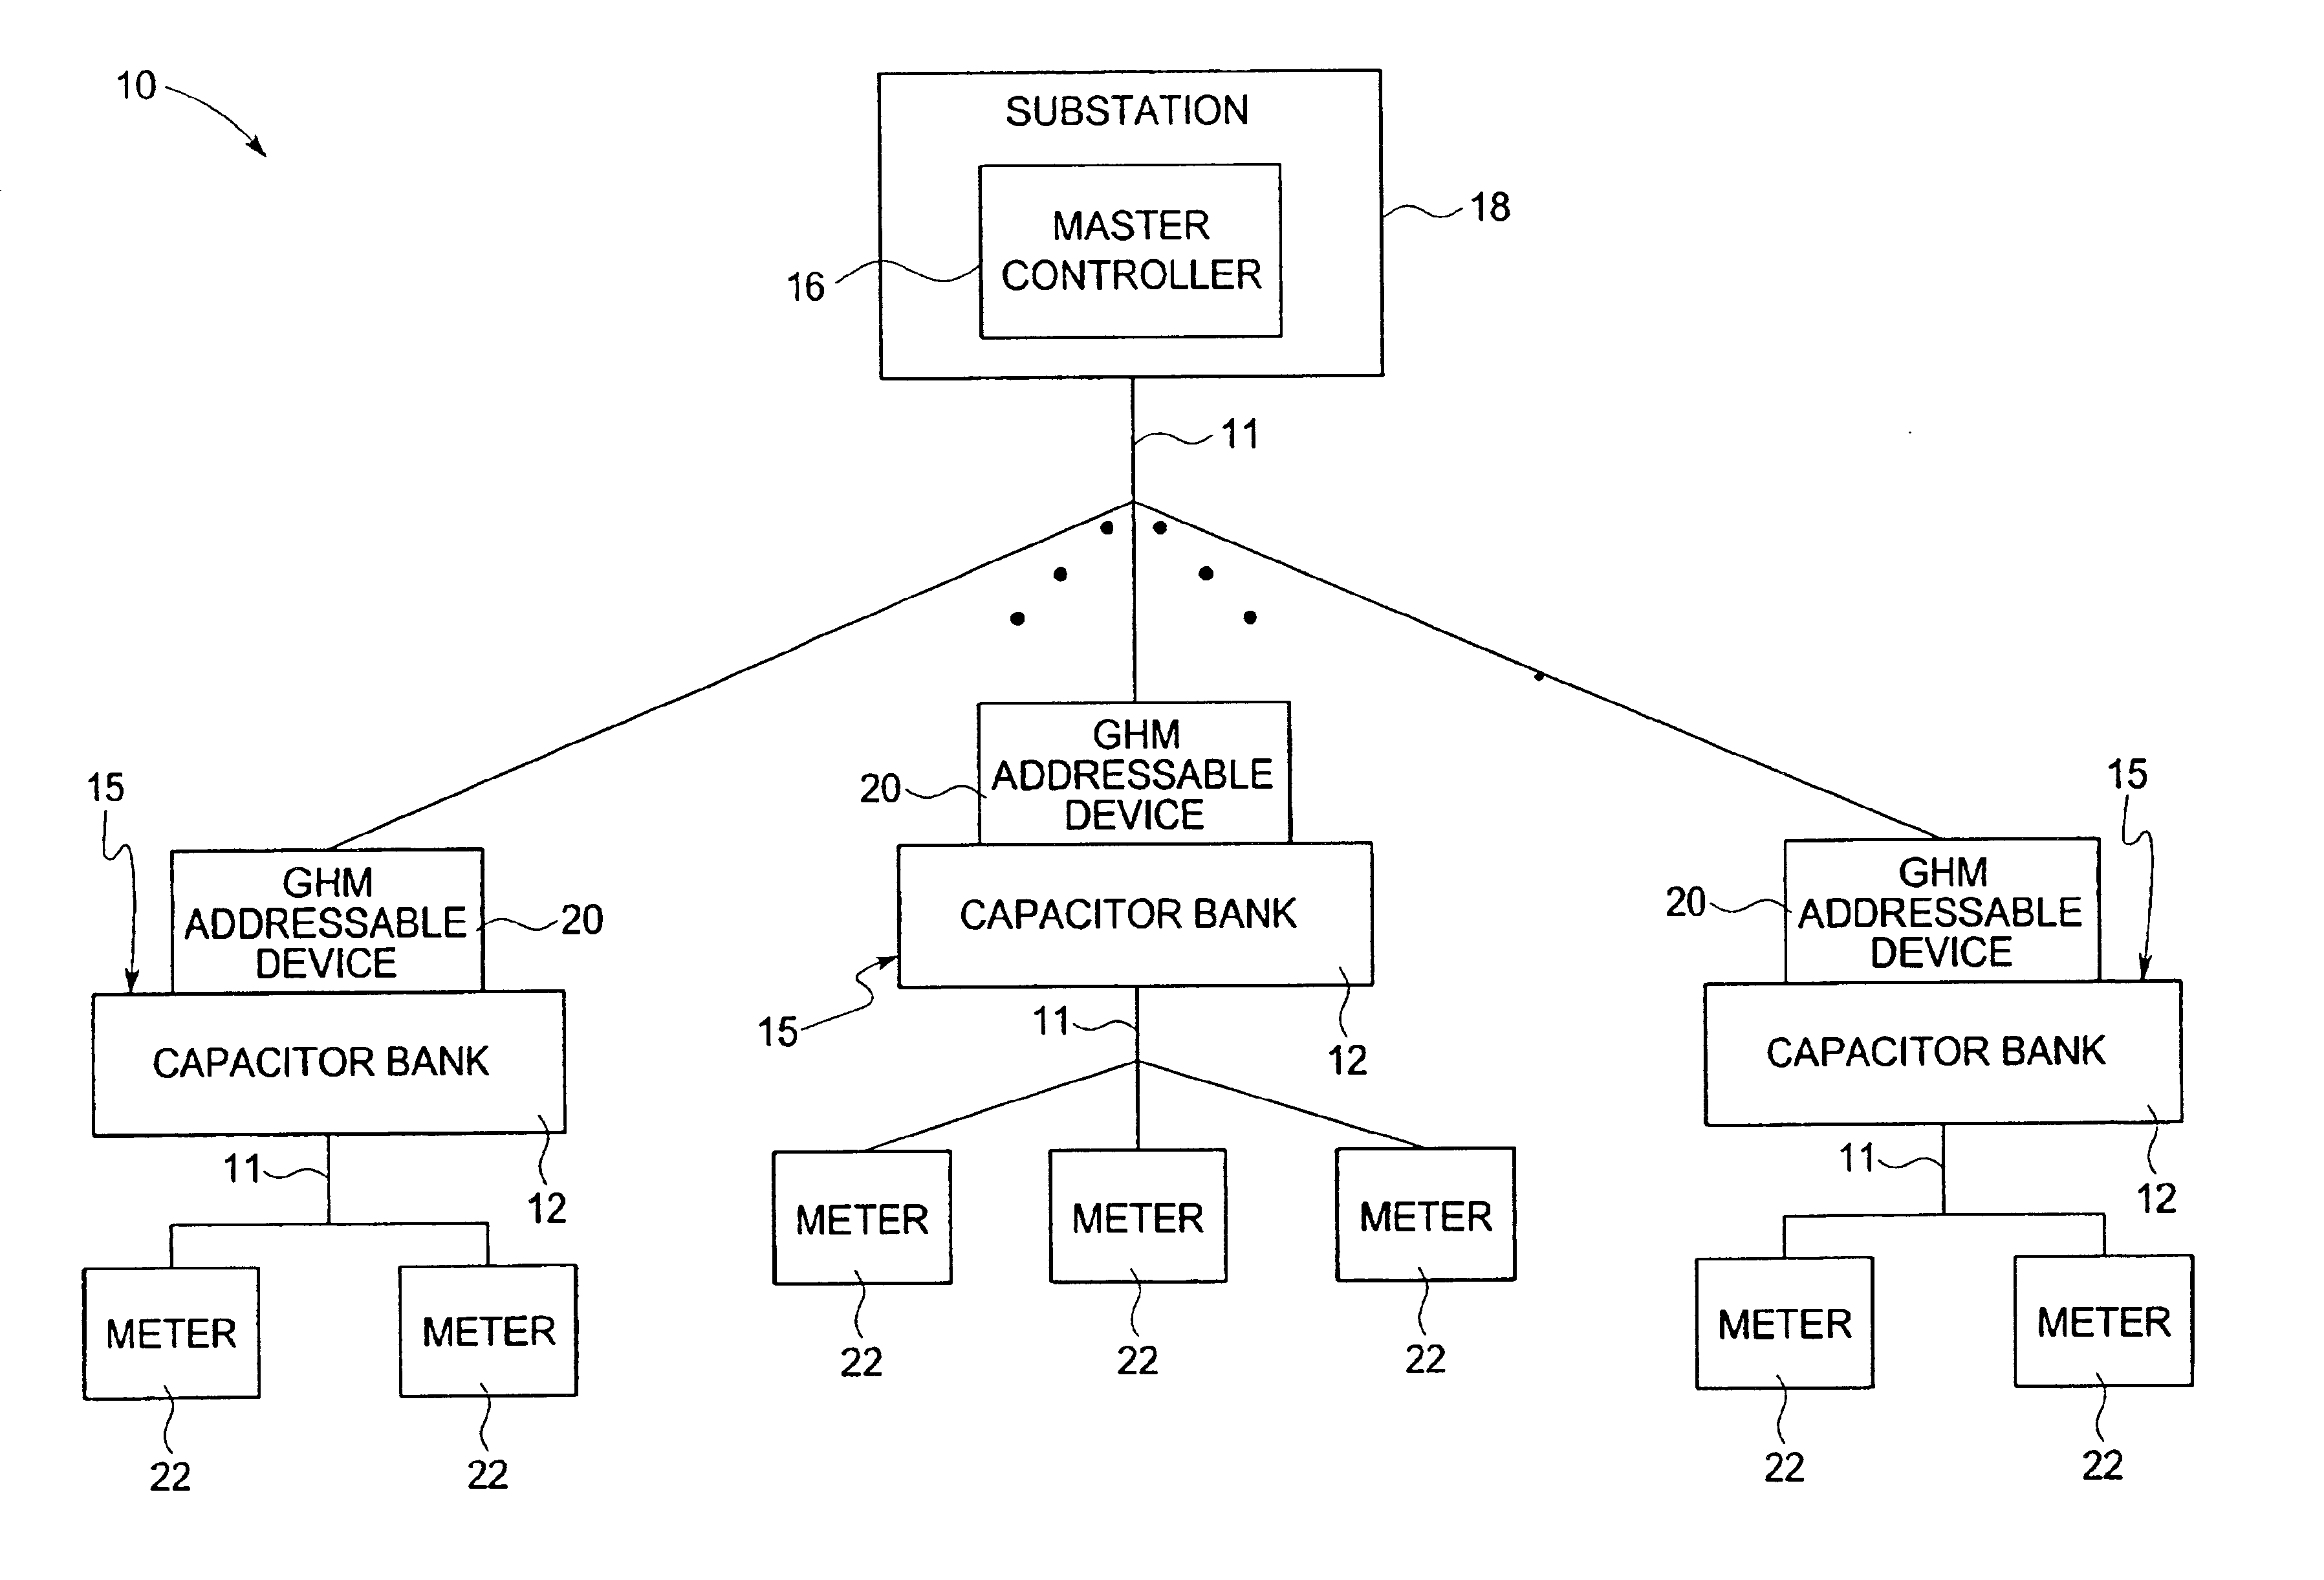 Apparatus and method for reconfiguring a power line communication system